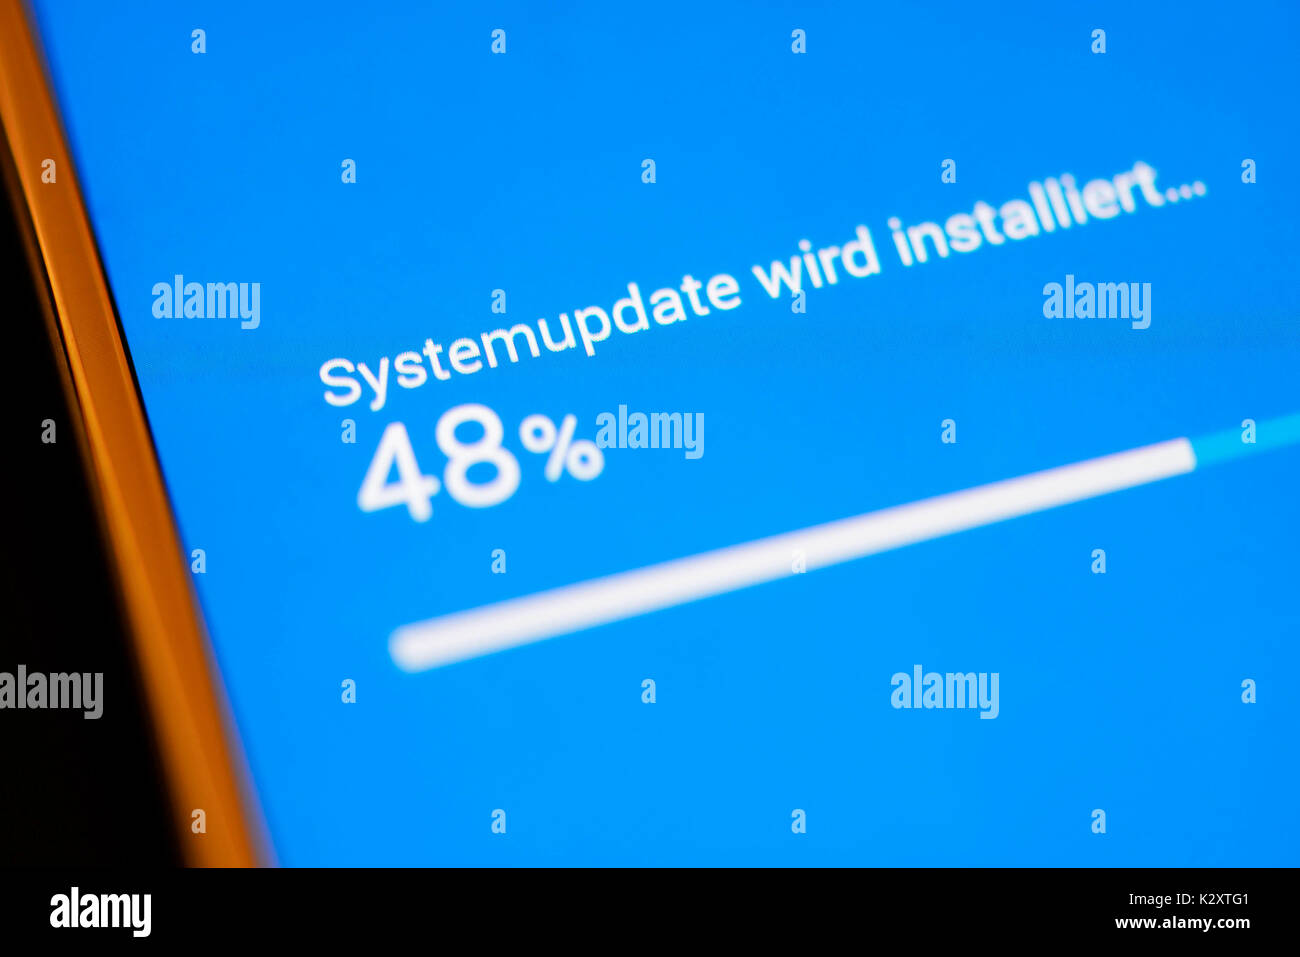 Store of the system update on an Android smartphone, Laden des Systemupdates auf einem Android-Smartphone Stock Photo